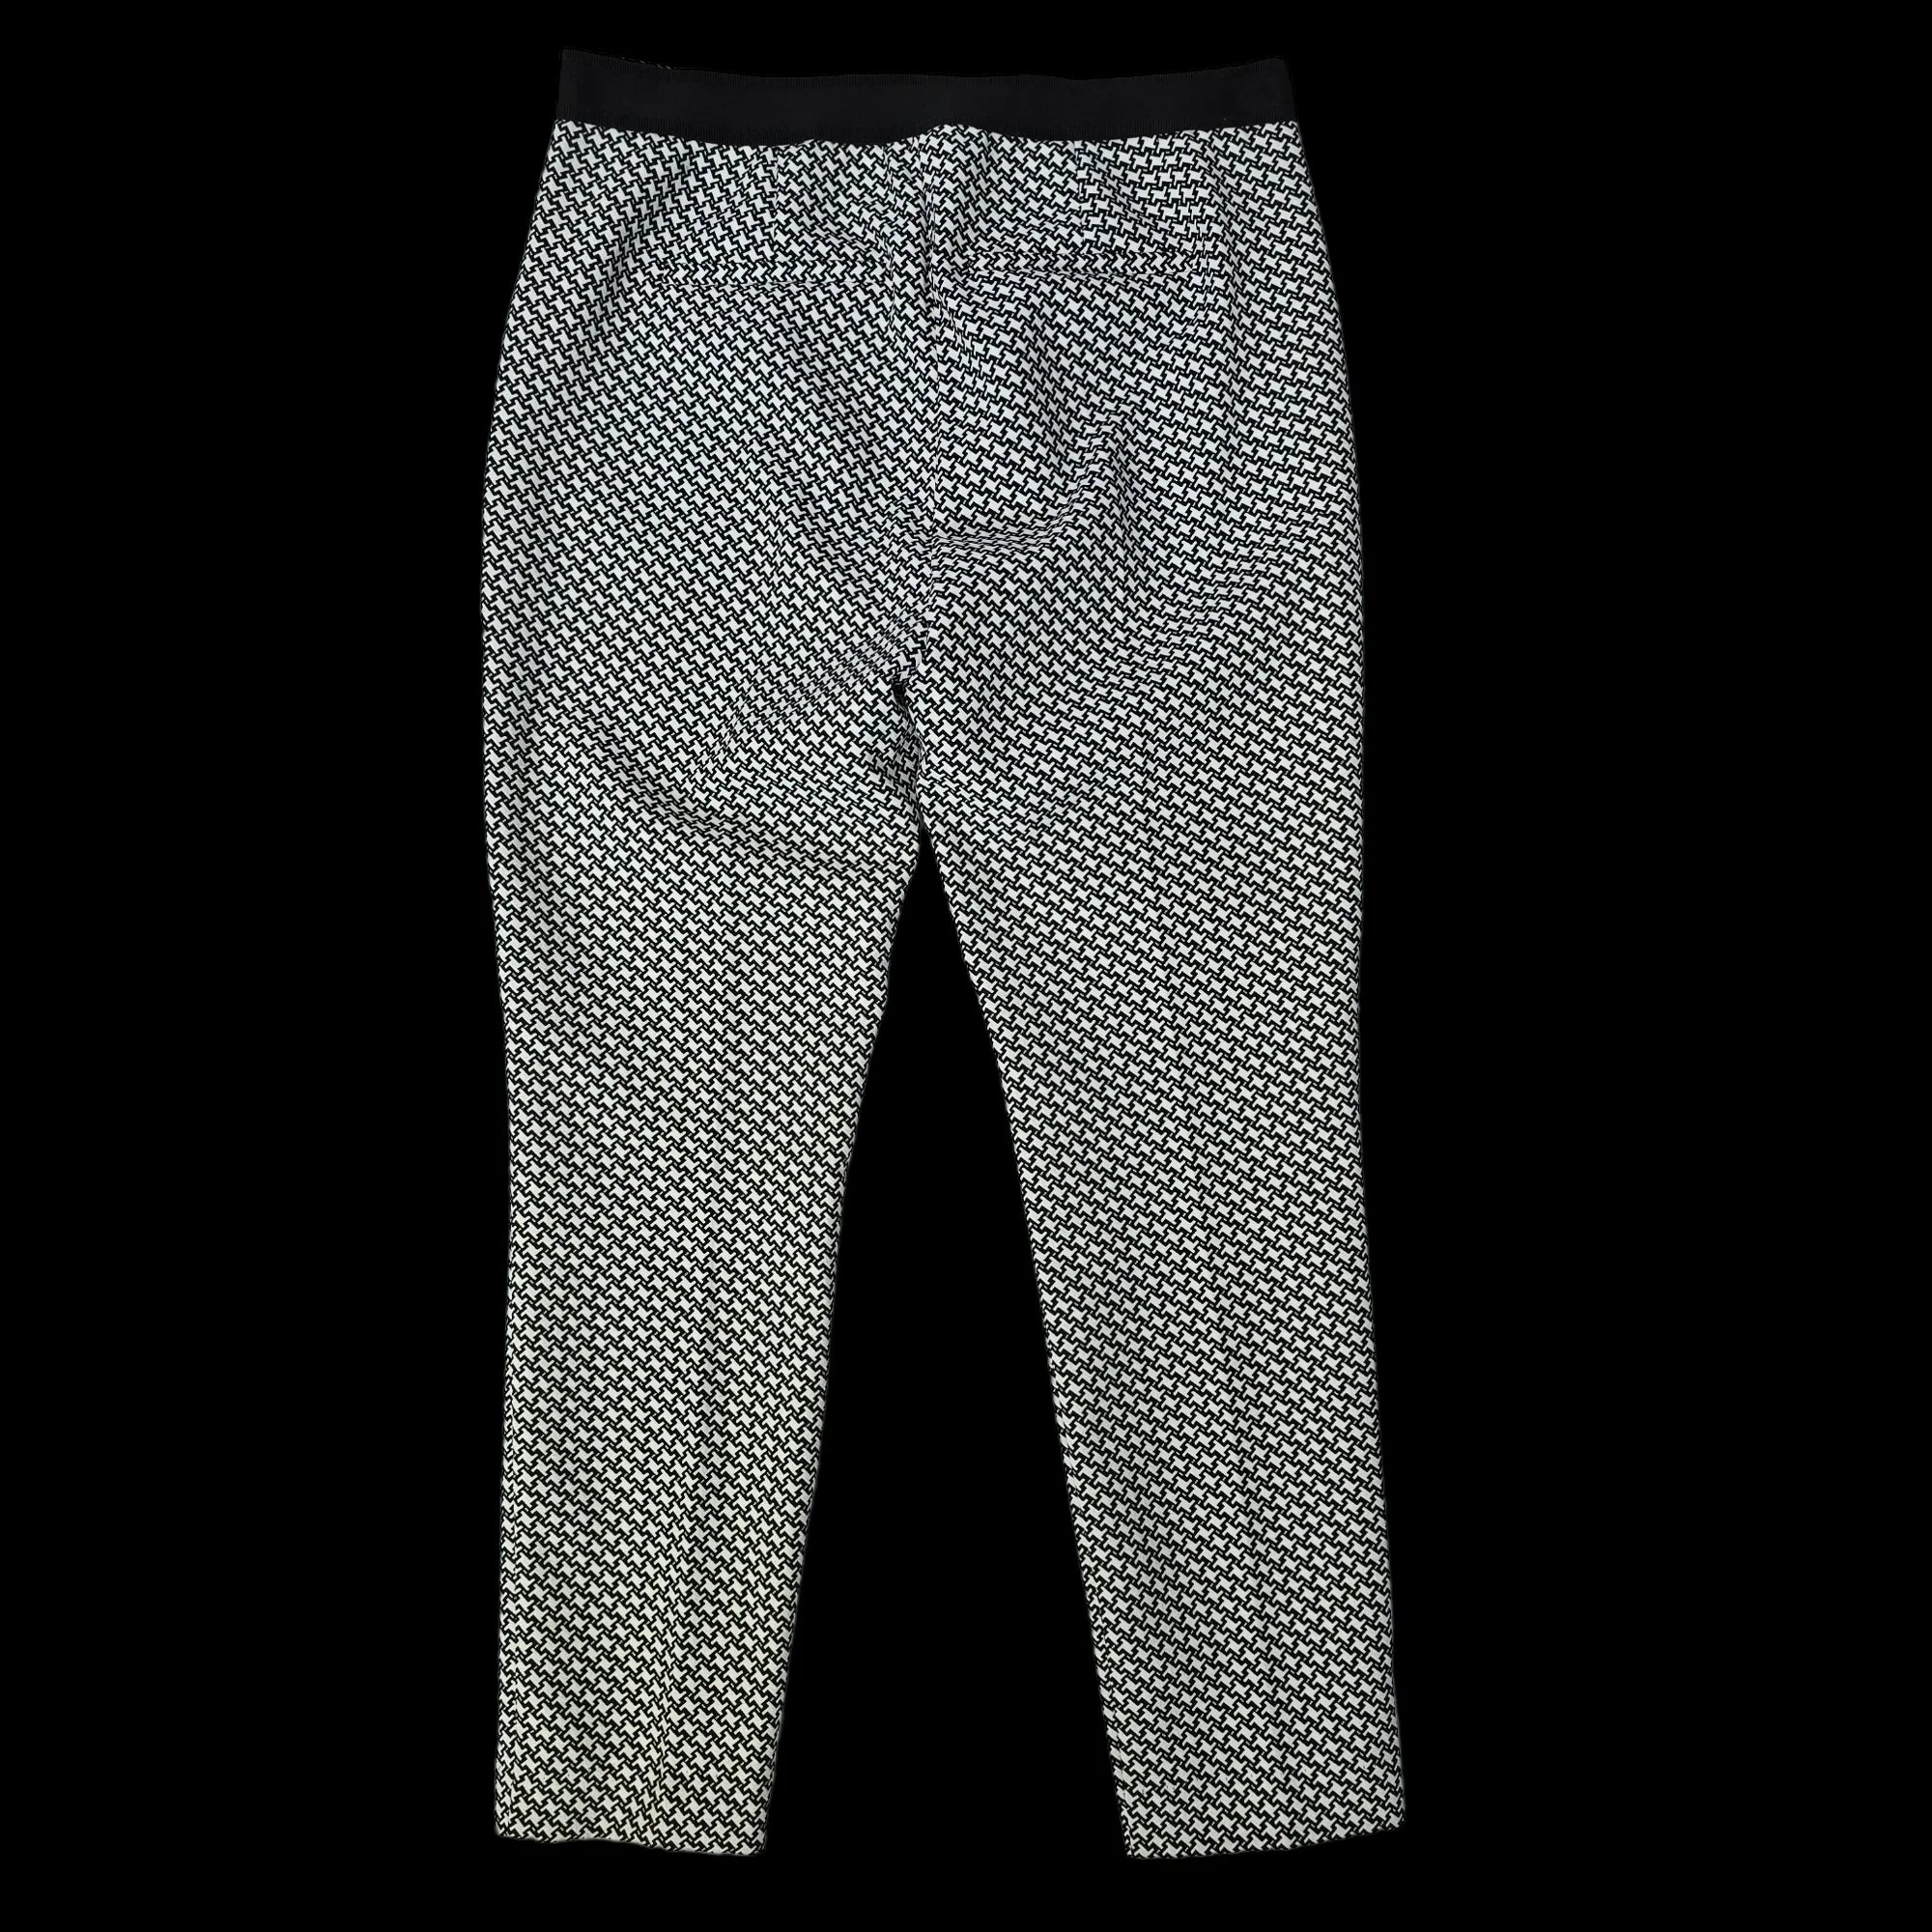 Womens Next Black And White Ankle Trousers UK 10R - 4 - 3598